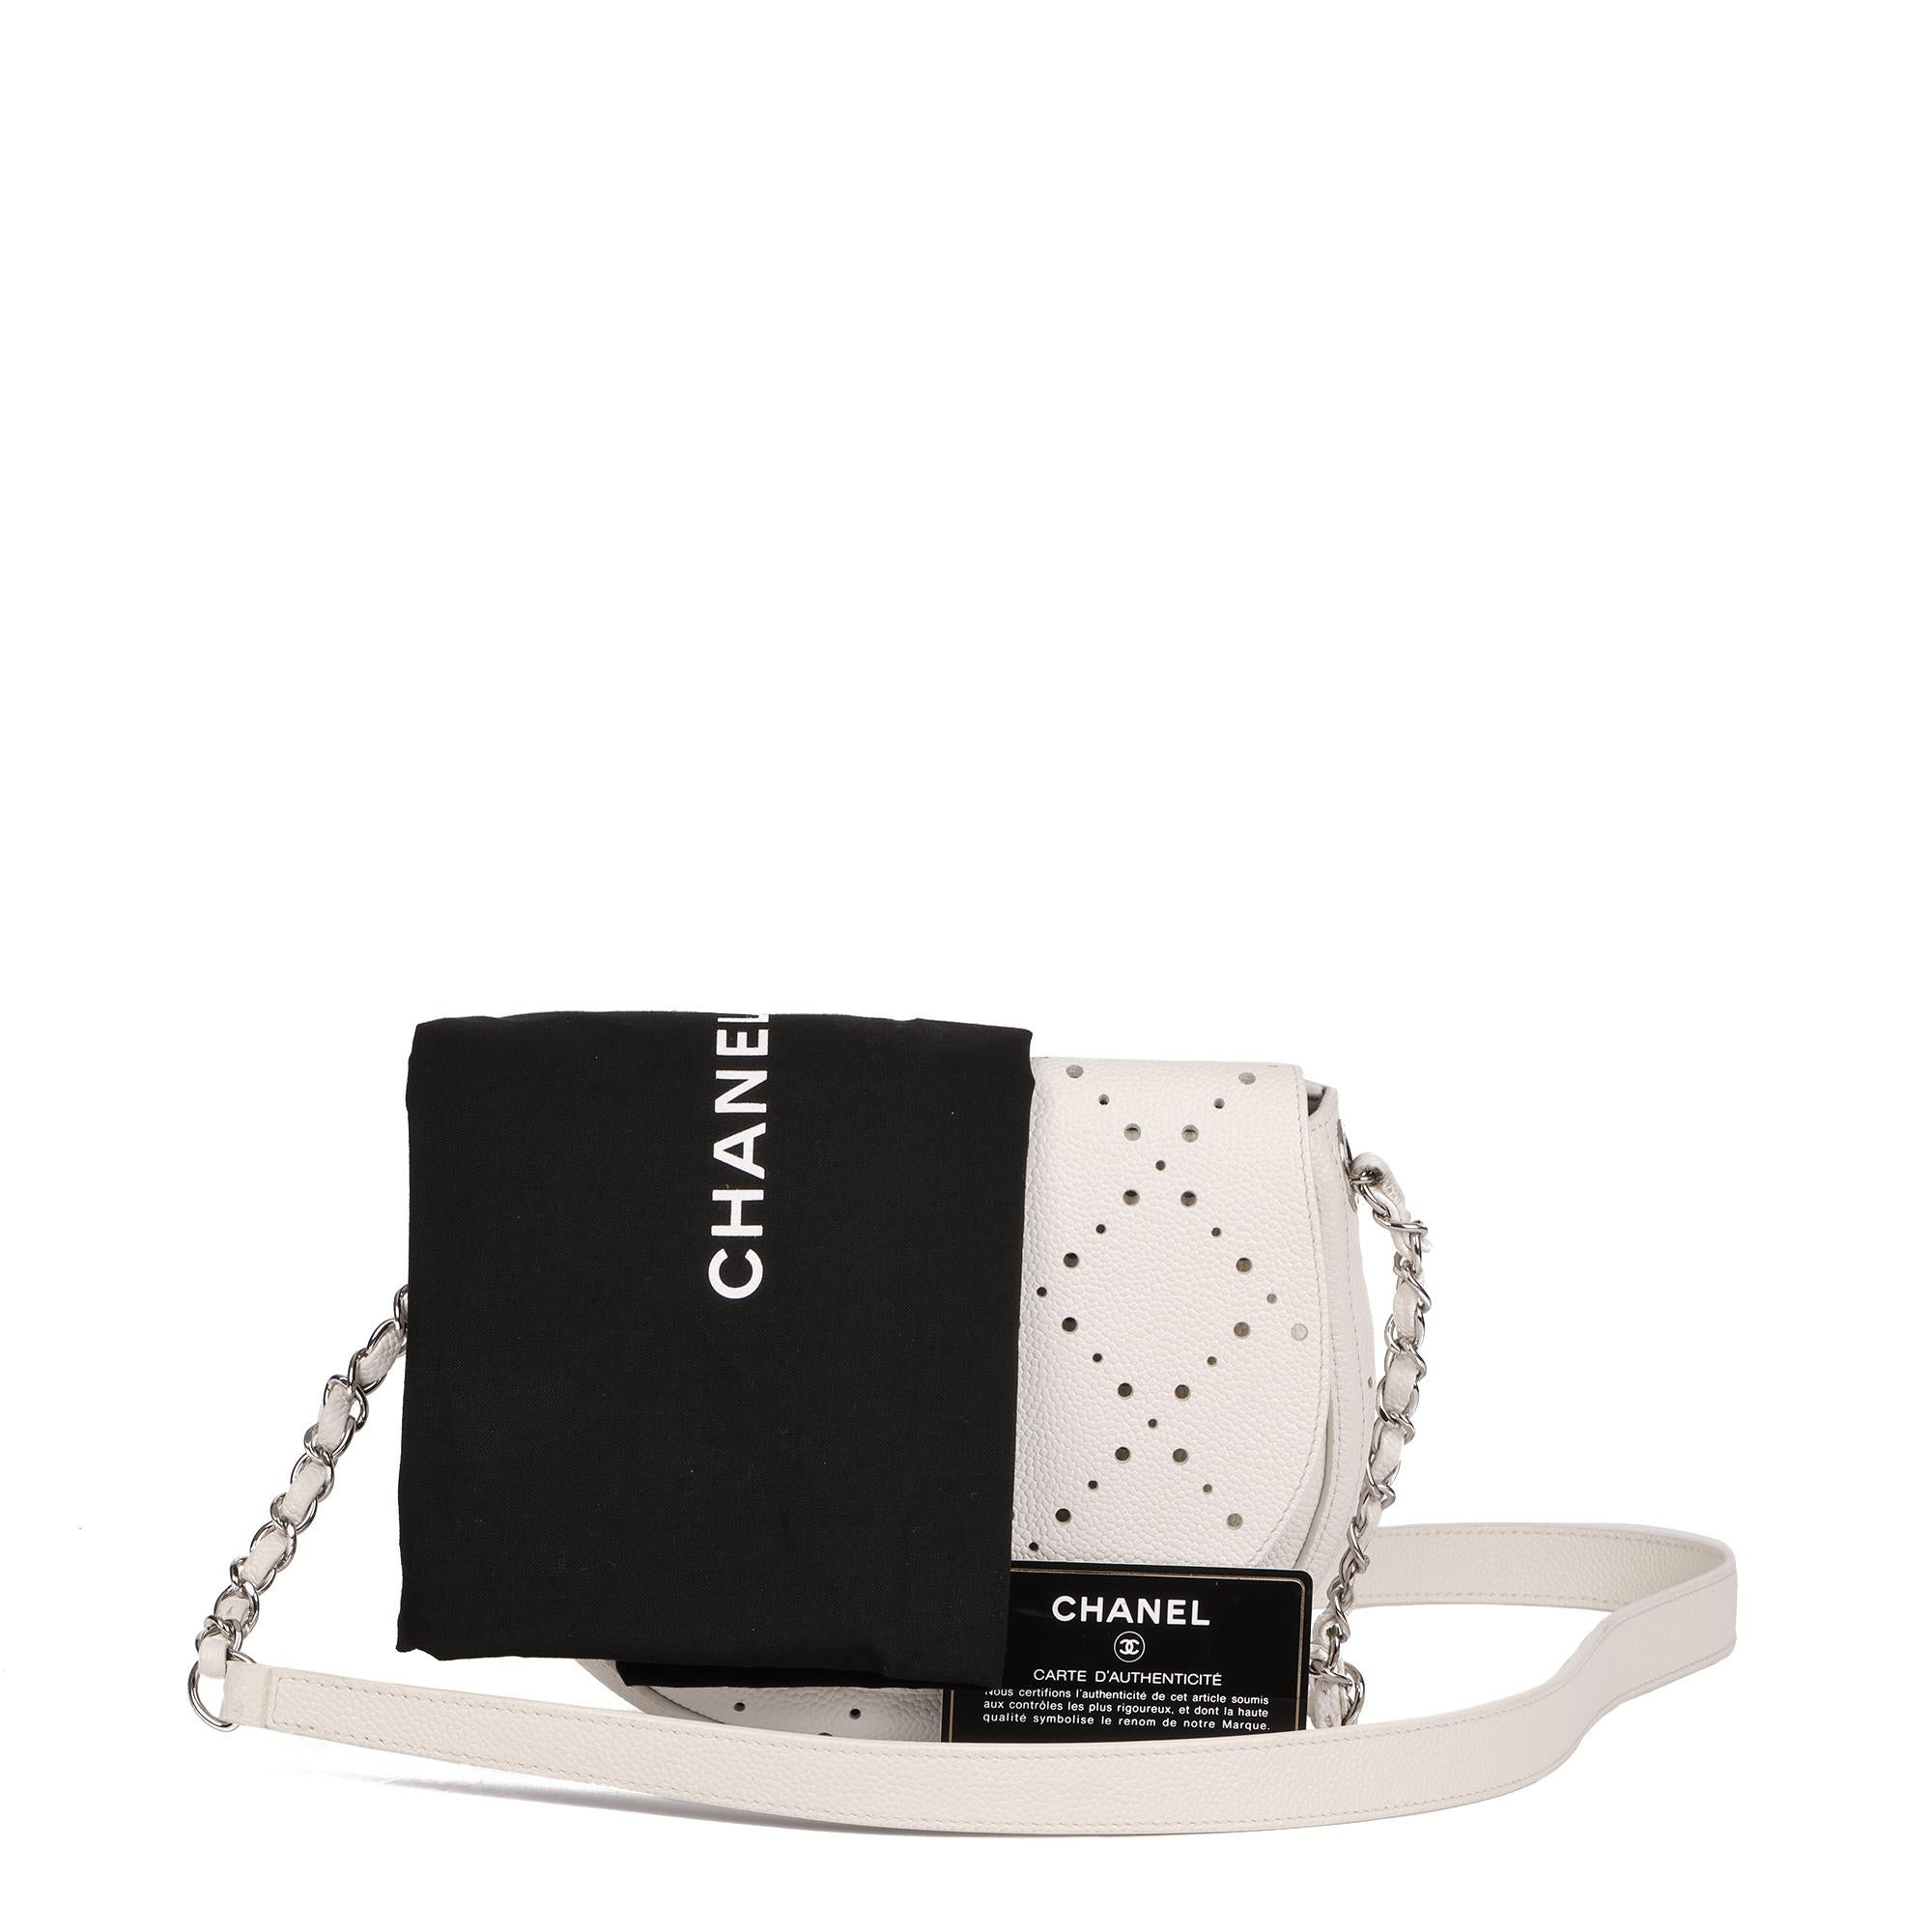 CHANEL White Perforated Caviar Leather CC Perforated Shoulder Bag For Sale 5